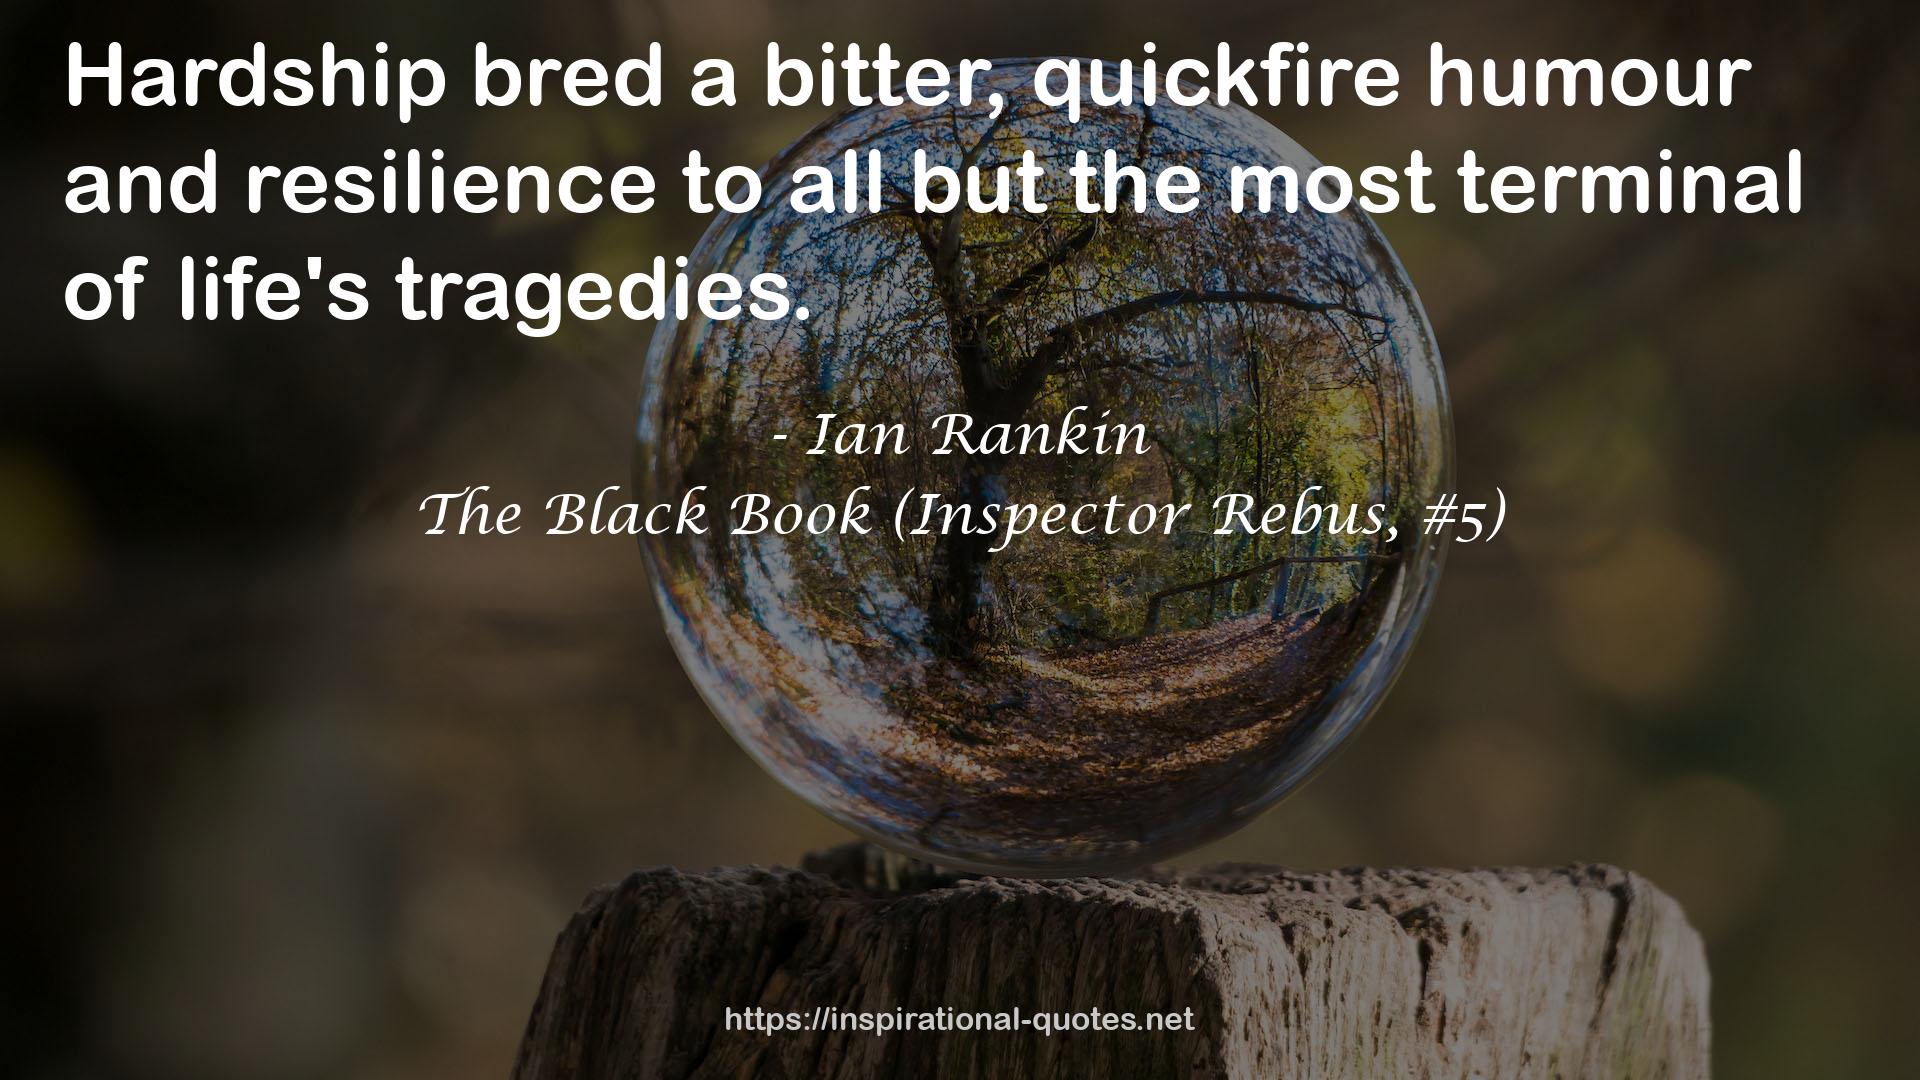 The Black Book (Inspector Rebus, #5) QUOTES